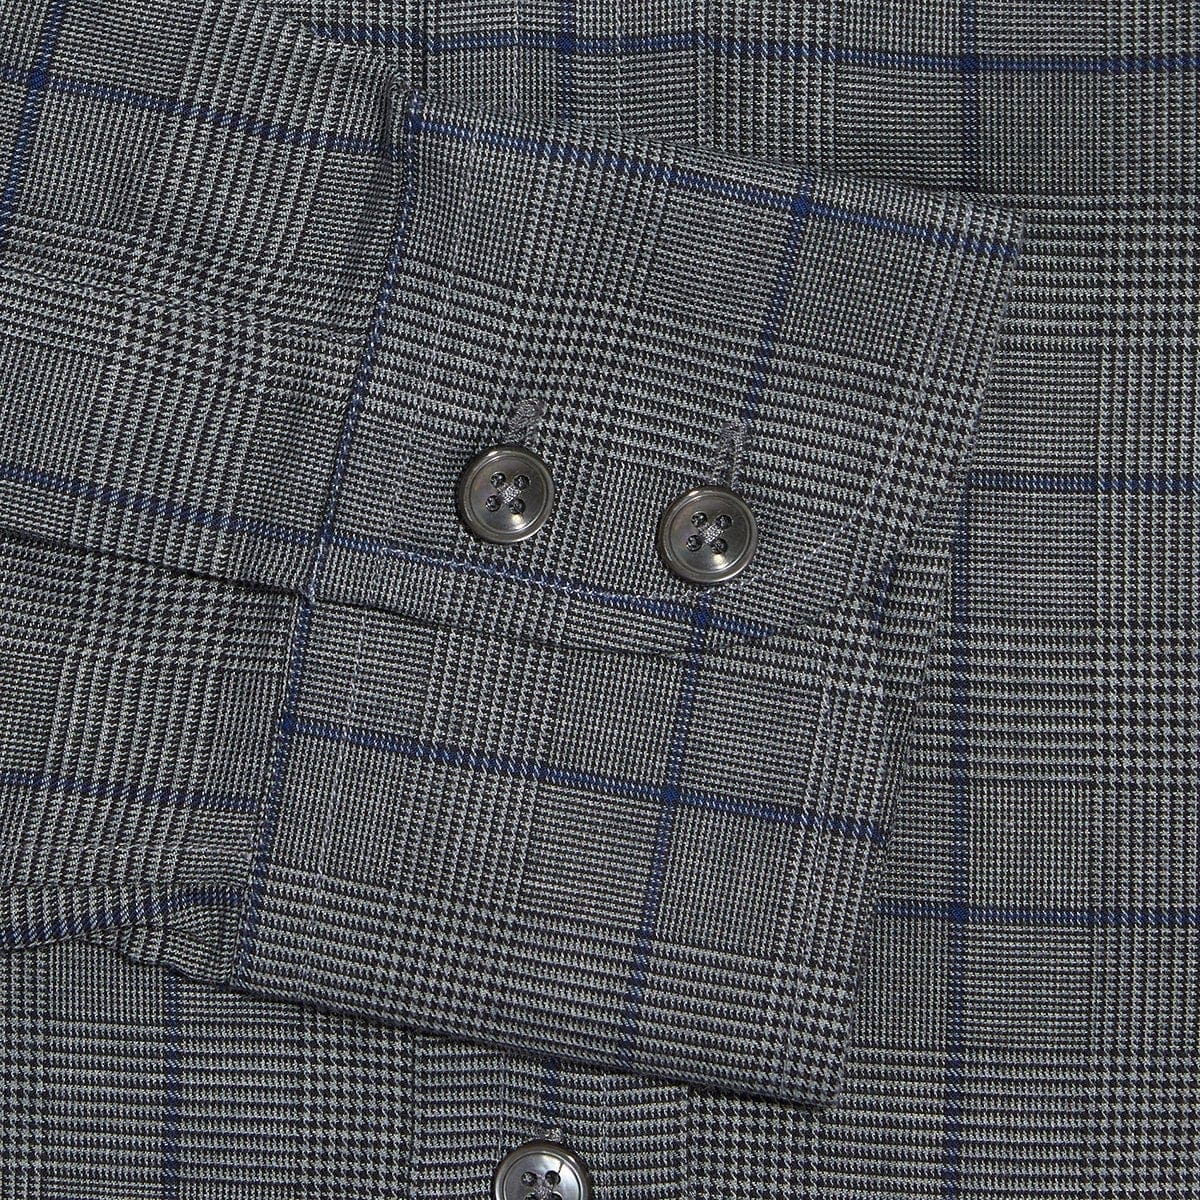 Contemporary Fit, Classic Collar, 2 Button Cuff Shirt in a Grey, Black & Navy PoW Check Twill Cotton